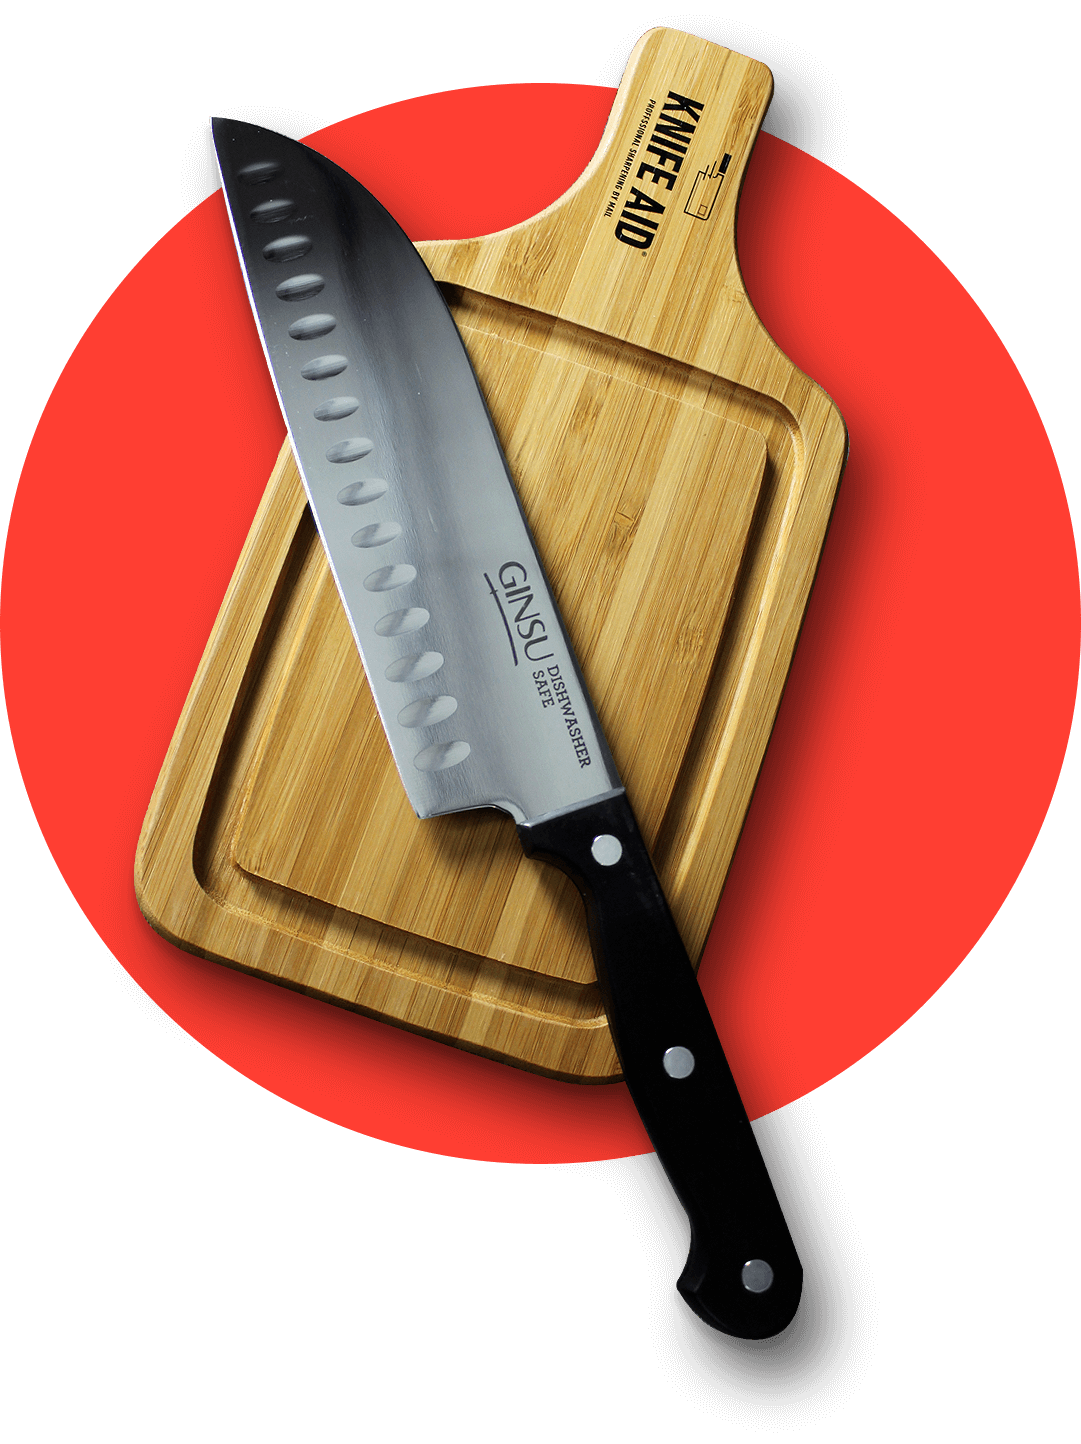 The free GINSU knife is back! Get a free 5 Chef's Knife with every  sharpening order. Order now and chop, dice, and slice to your heart's…